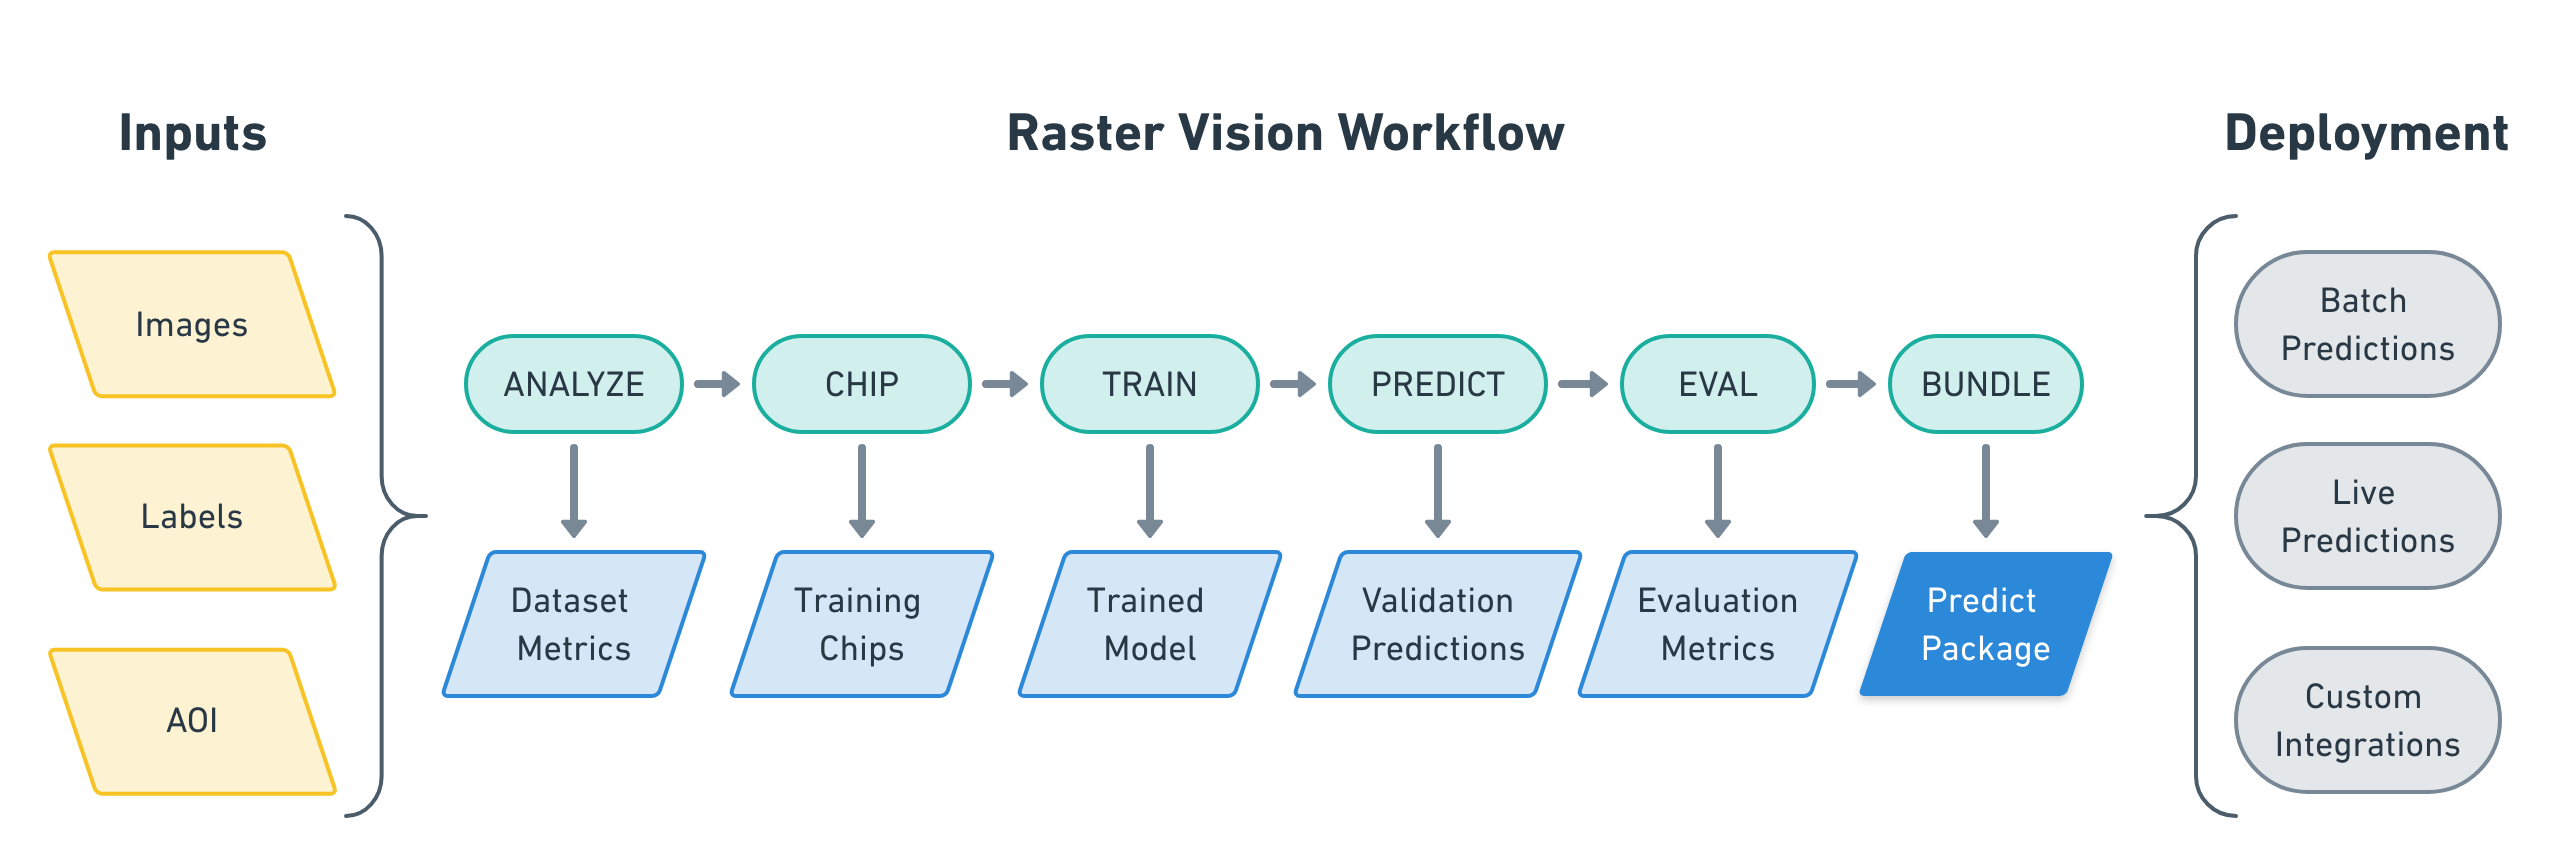 _images/overview-raster-vision-workflow.png